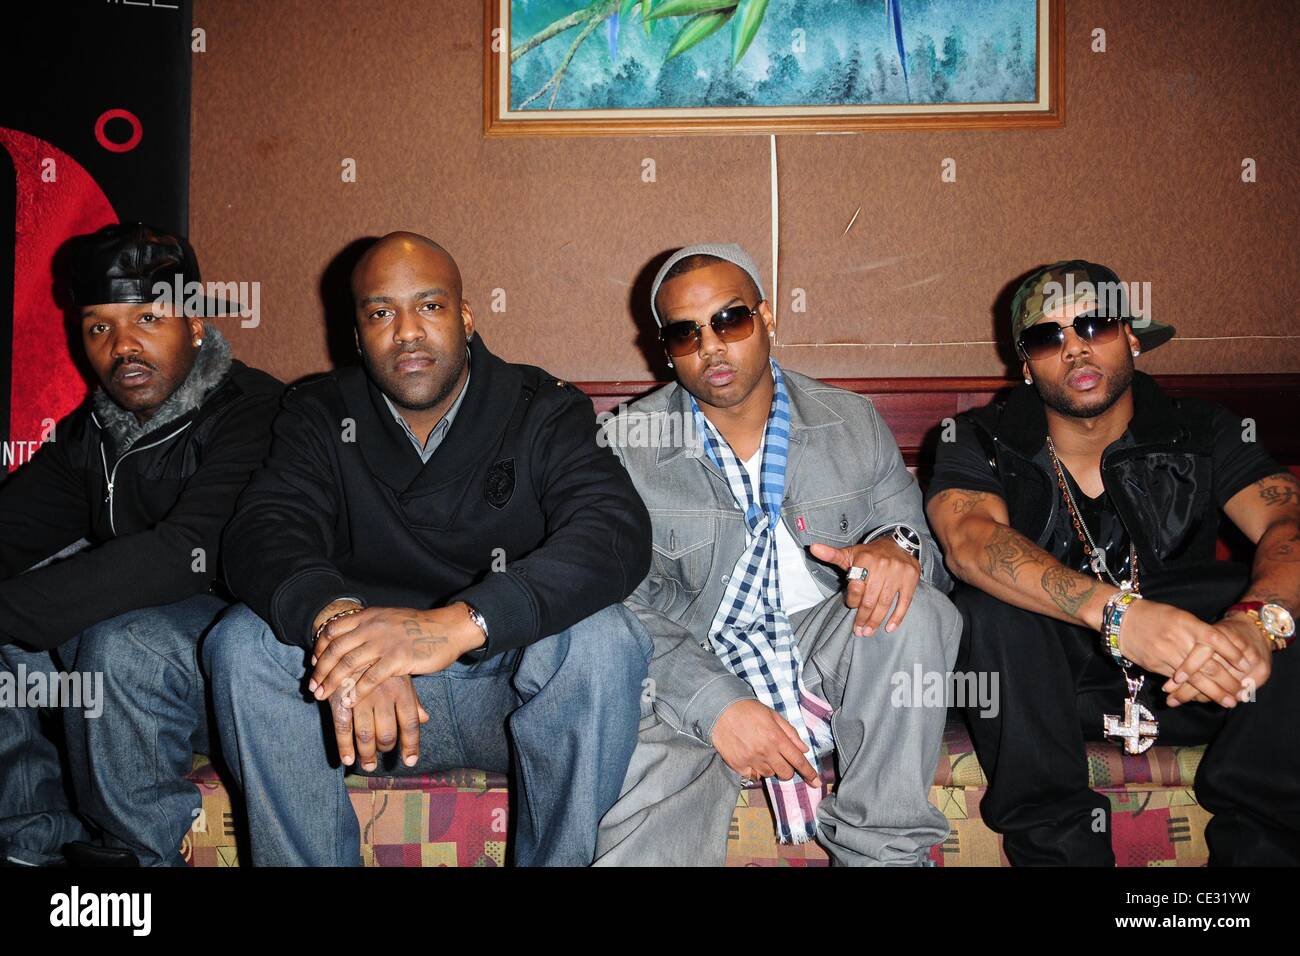 Jagged Edge  Jagged Edge new single release party for 'Baby' at Cafe Iguana Pembroke Pines, Florida - 14.02.11 Stock Photo